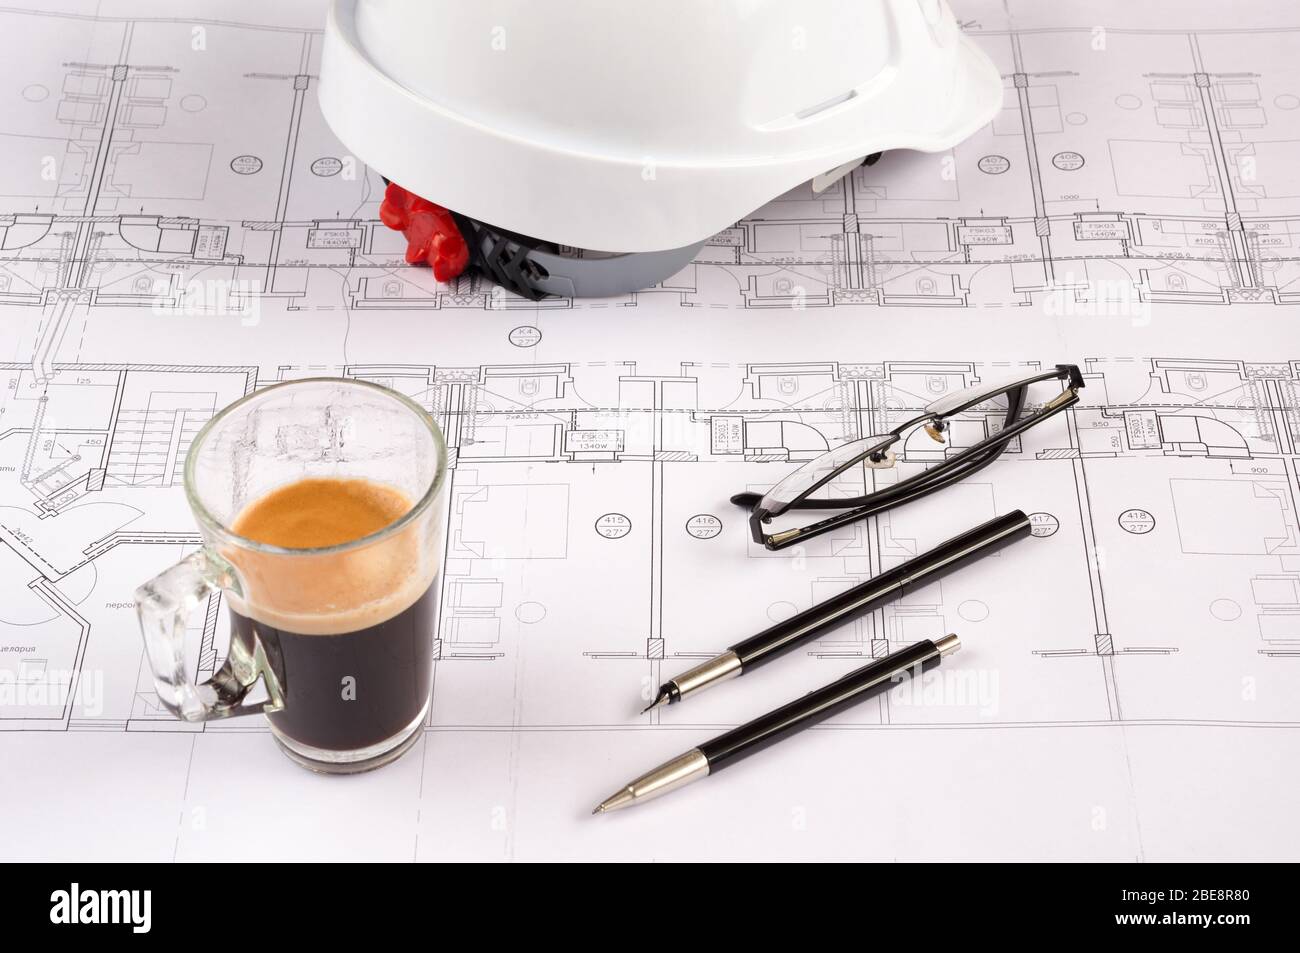 Architects workplace - architectural blueprints with safety helmet, glasses, propelling pencil and coffee on table. Top view. Stock Photo